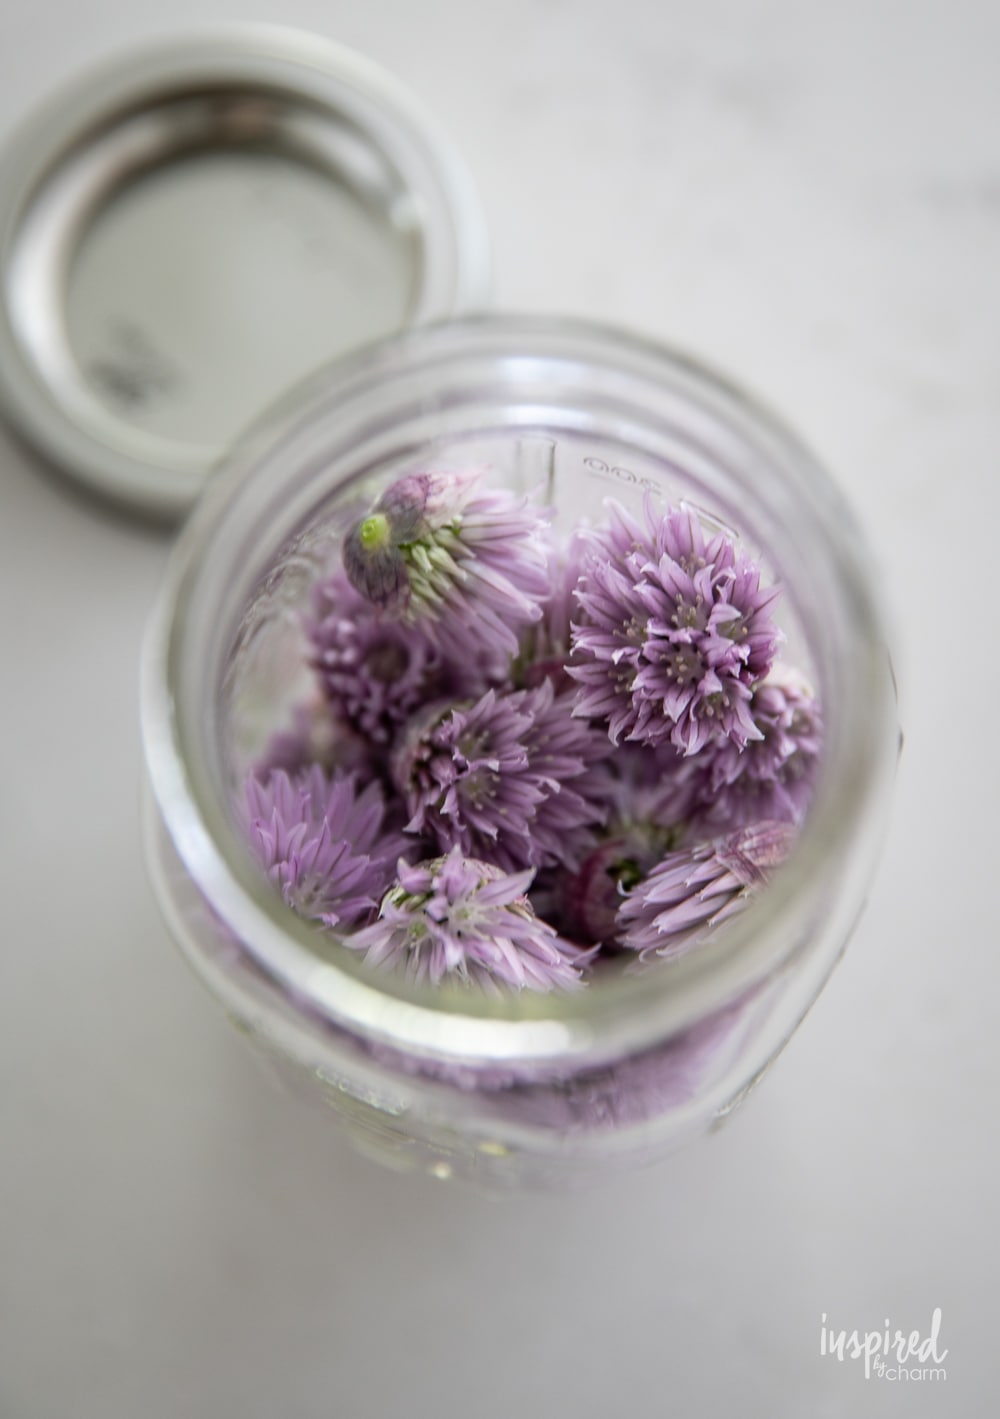 chive blossoms in a canning jar.